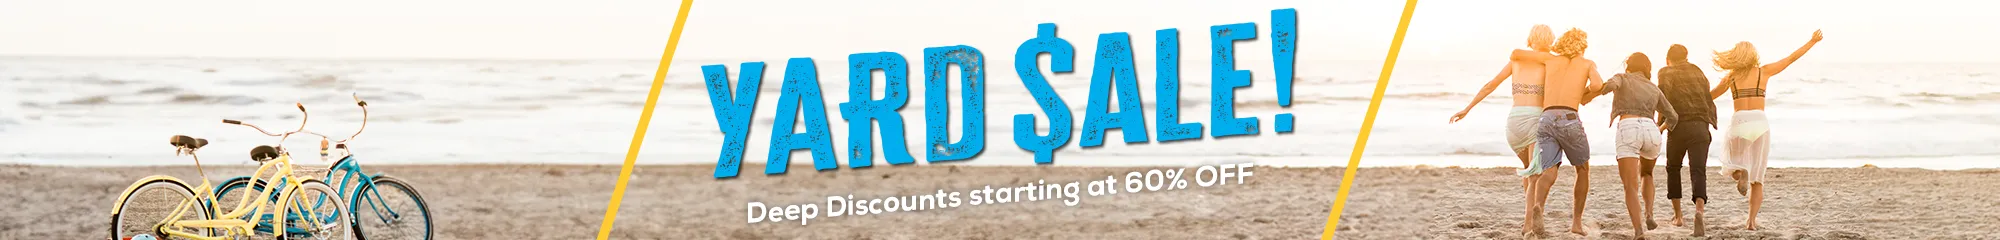 Yard Sale! Deals starting at 60% off on past season styles. 